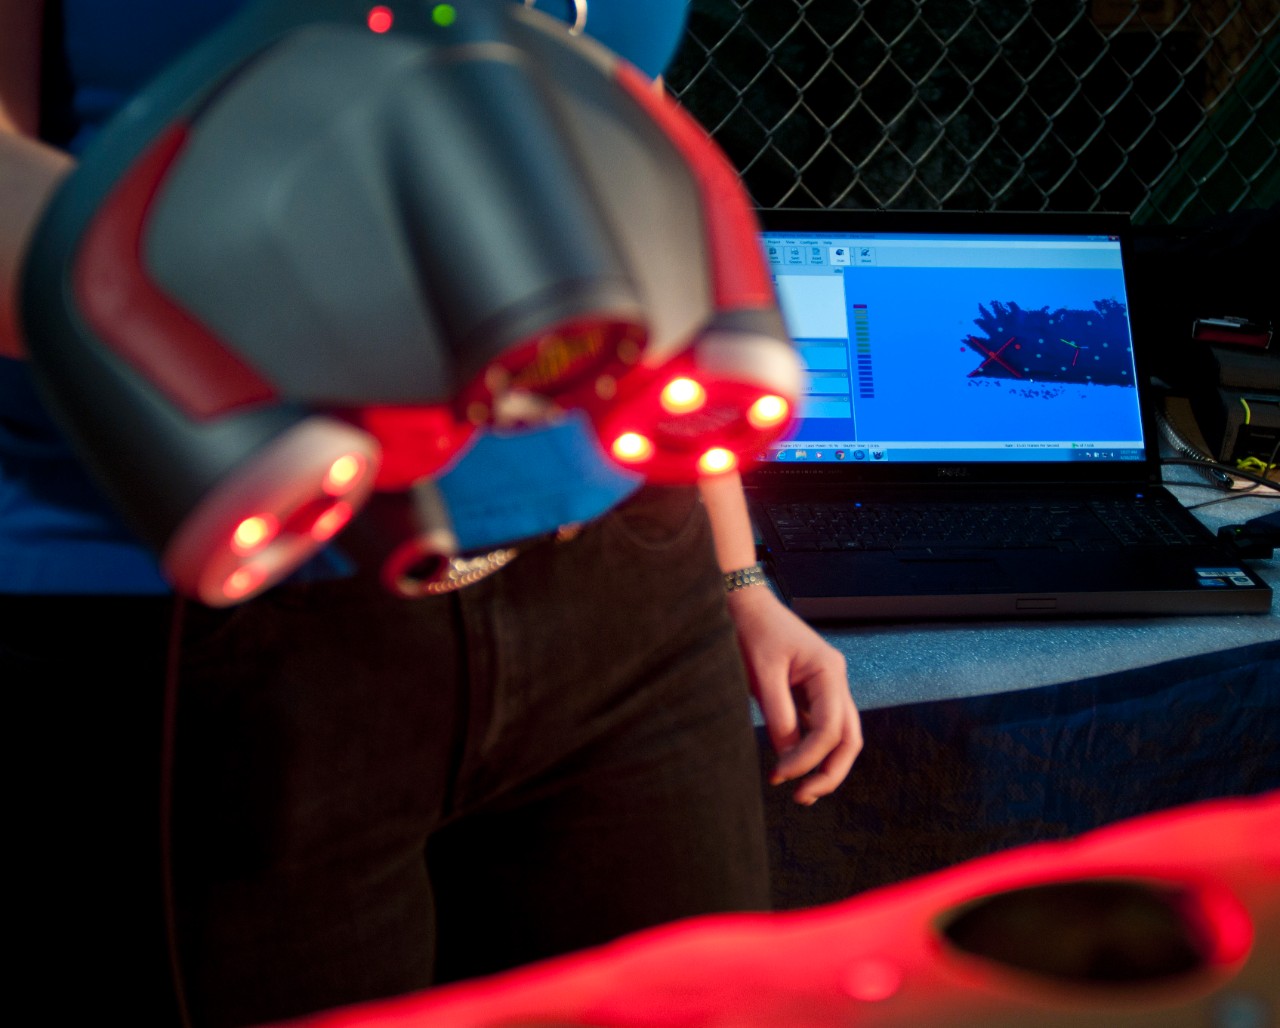 140430-N-TH437-002 WASHINGTON (April 30, 2014) A 3-dimensional scan generates on a laptop screen as Caitlin Swec, a project engineer at Naval Surface Warfare Center Carderock Division, scans the number 24 Howell Torpedo, at the Underwater Archeol...